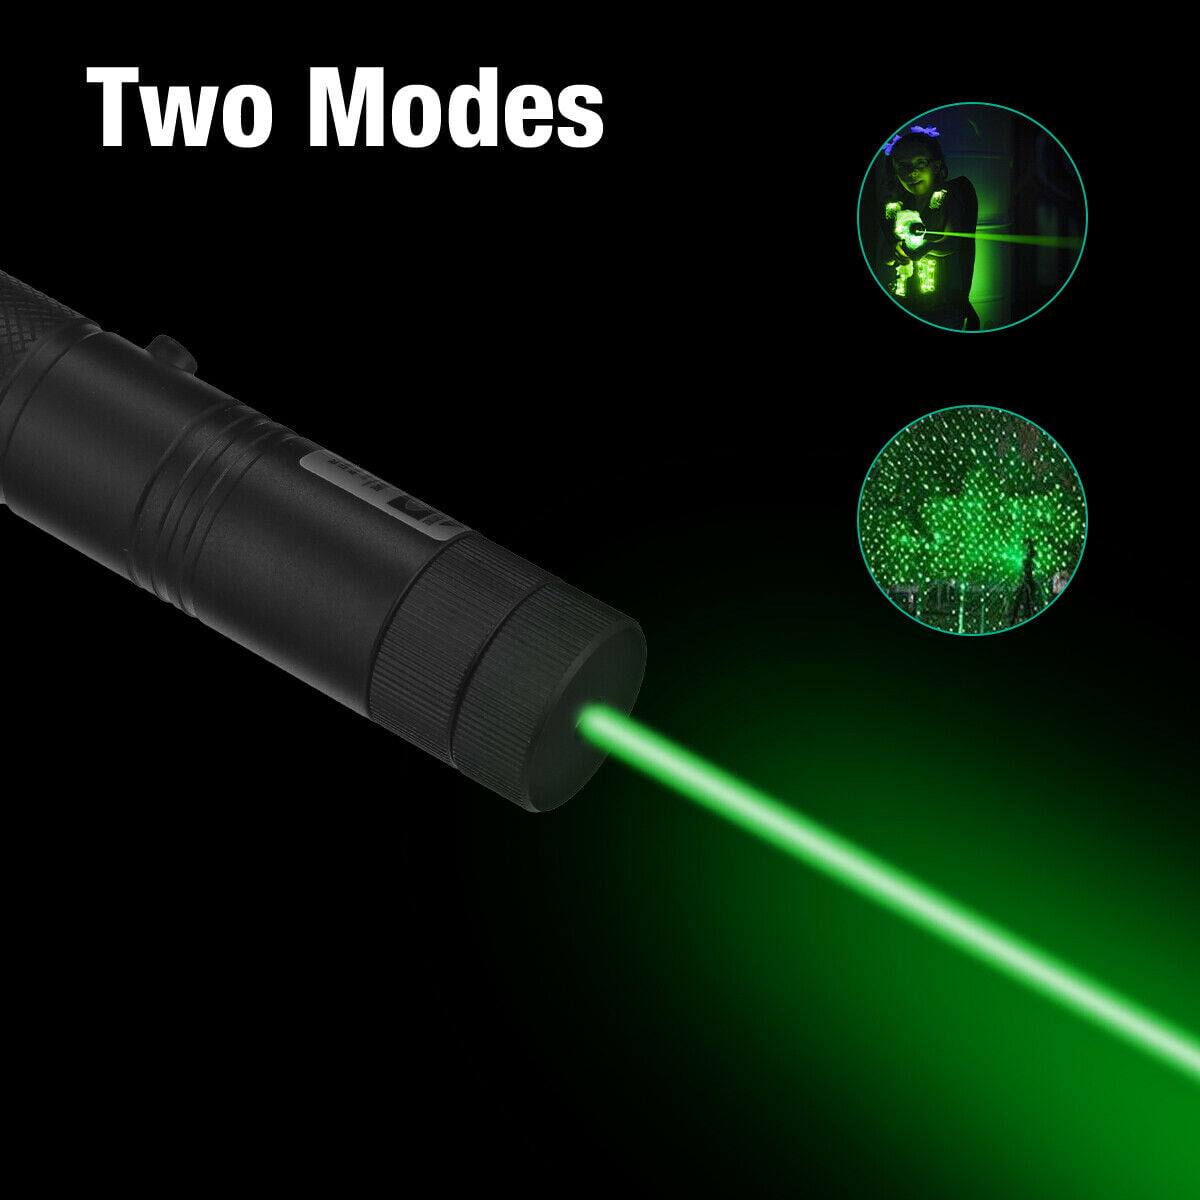 Details about   2PC 900Miles USB Rechargeable Red+Green Laser Pointer Star Beam Lazer Pen 1 mW 